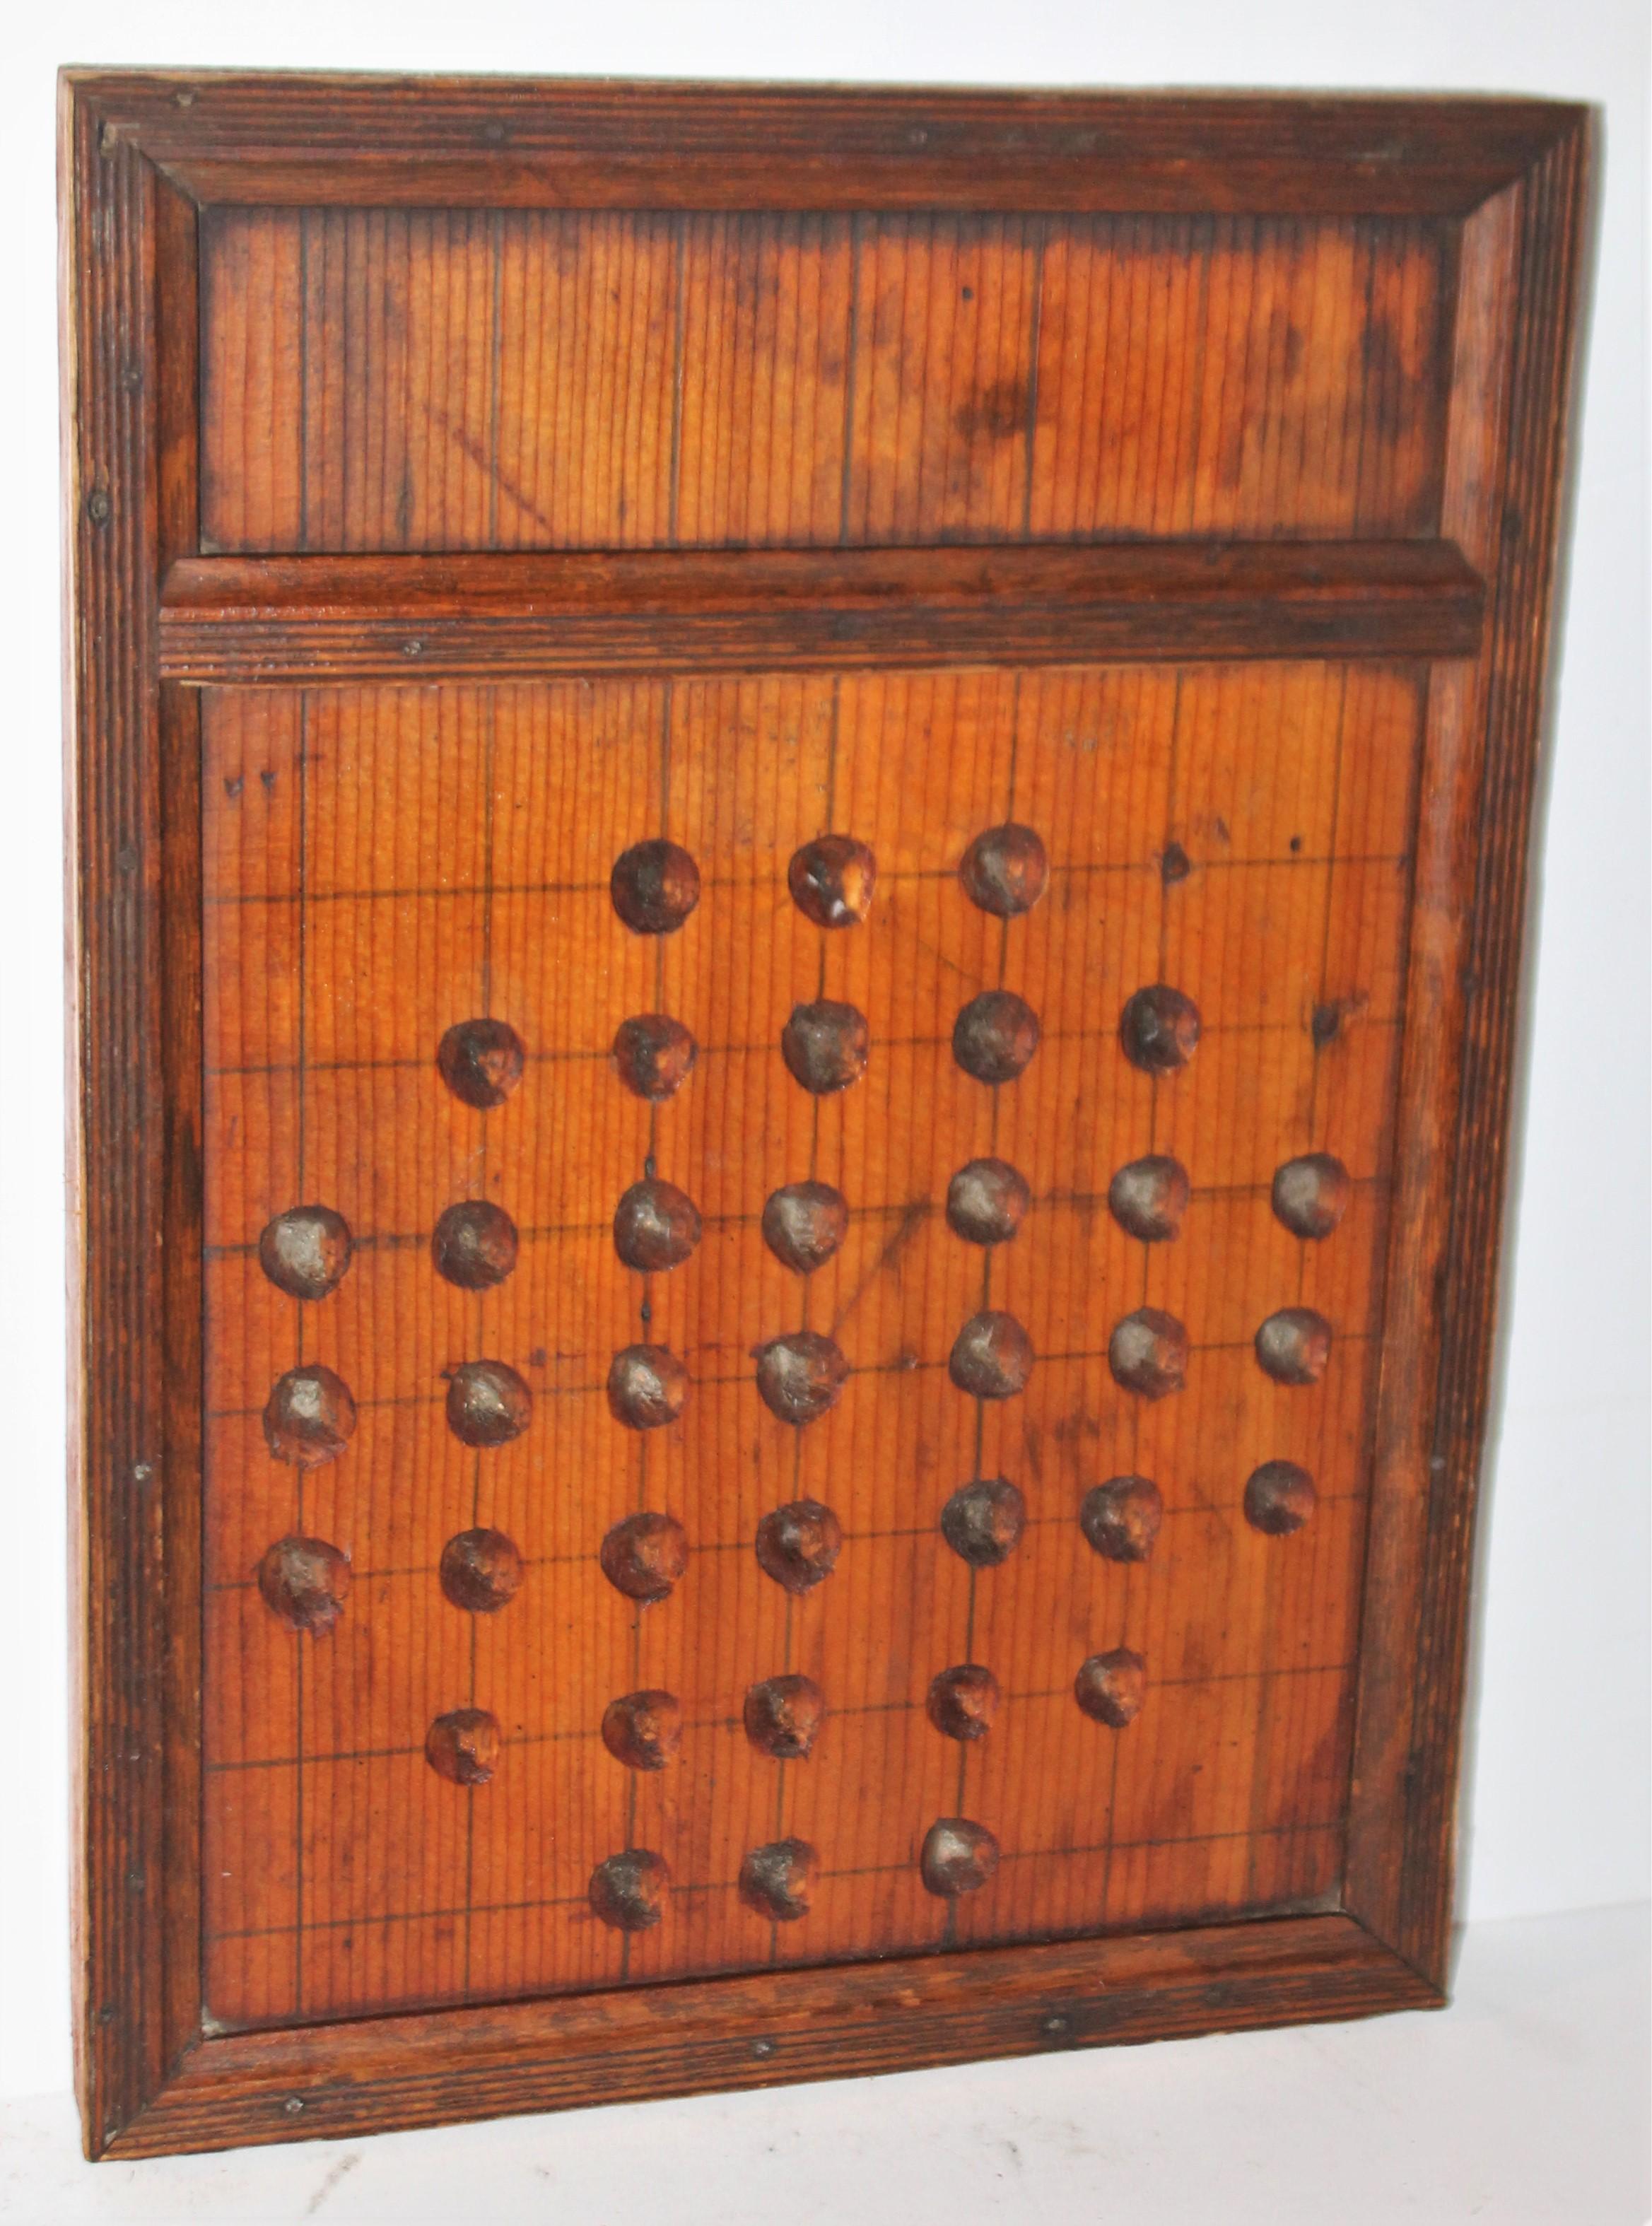 19th century handmade pine marble game board in good condition with a nice mellow patina.